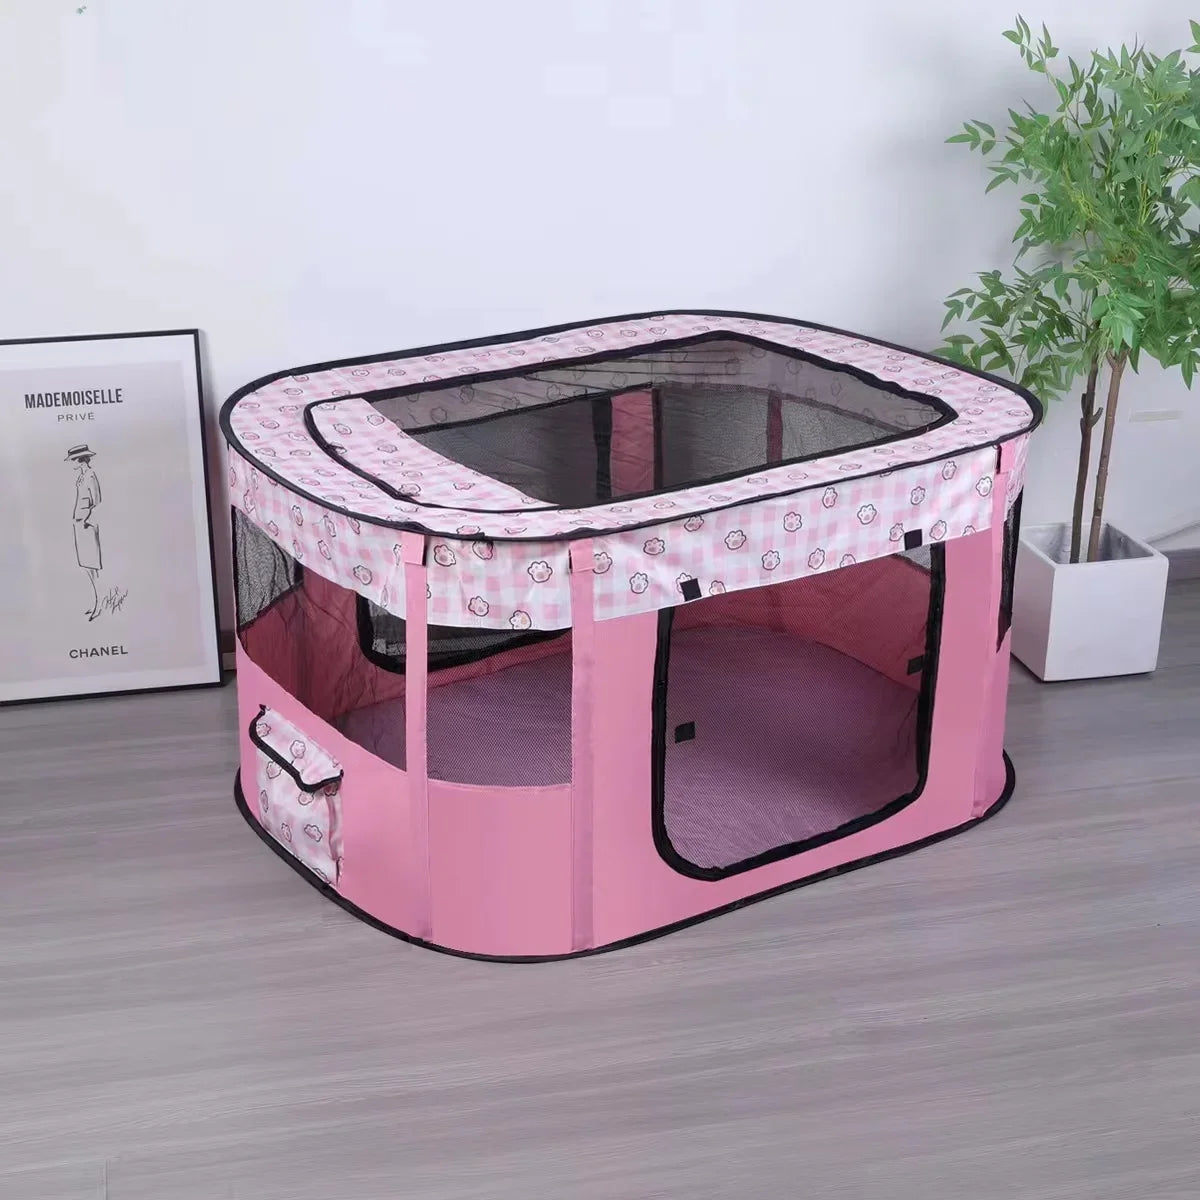 Cat House Delivery Room Puppy Kitten House Sweet Cozy Sweet Cat Bed Comfortable Cats Tent Folding for Dog Cats Supplies - Nekoby Cat House Delivery Room Puppy Kitten House Sweet Cozy Sweet Cat Bed Comfortable Cats Tent Folding for Dog Cats Supplies Pink 2 / M-70x55x45cm